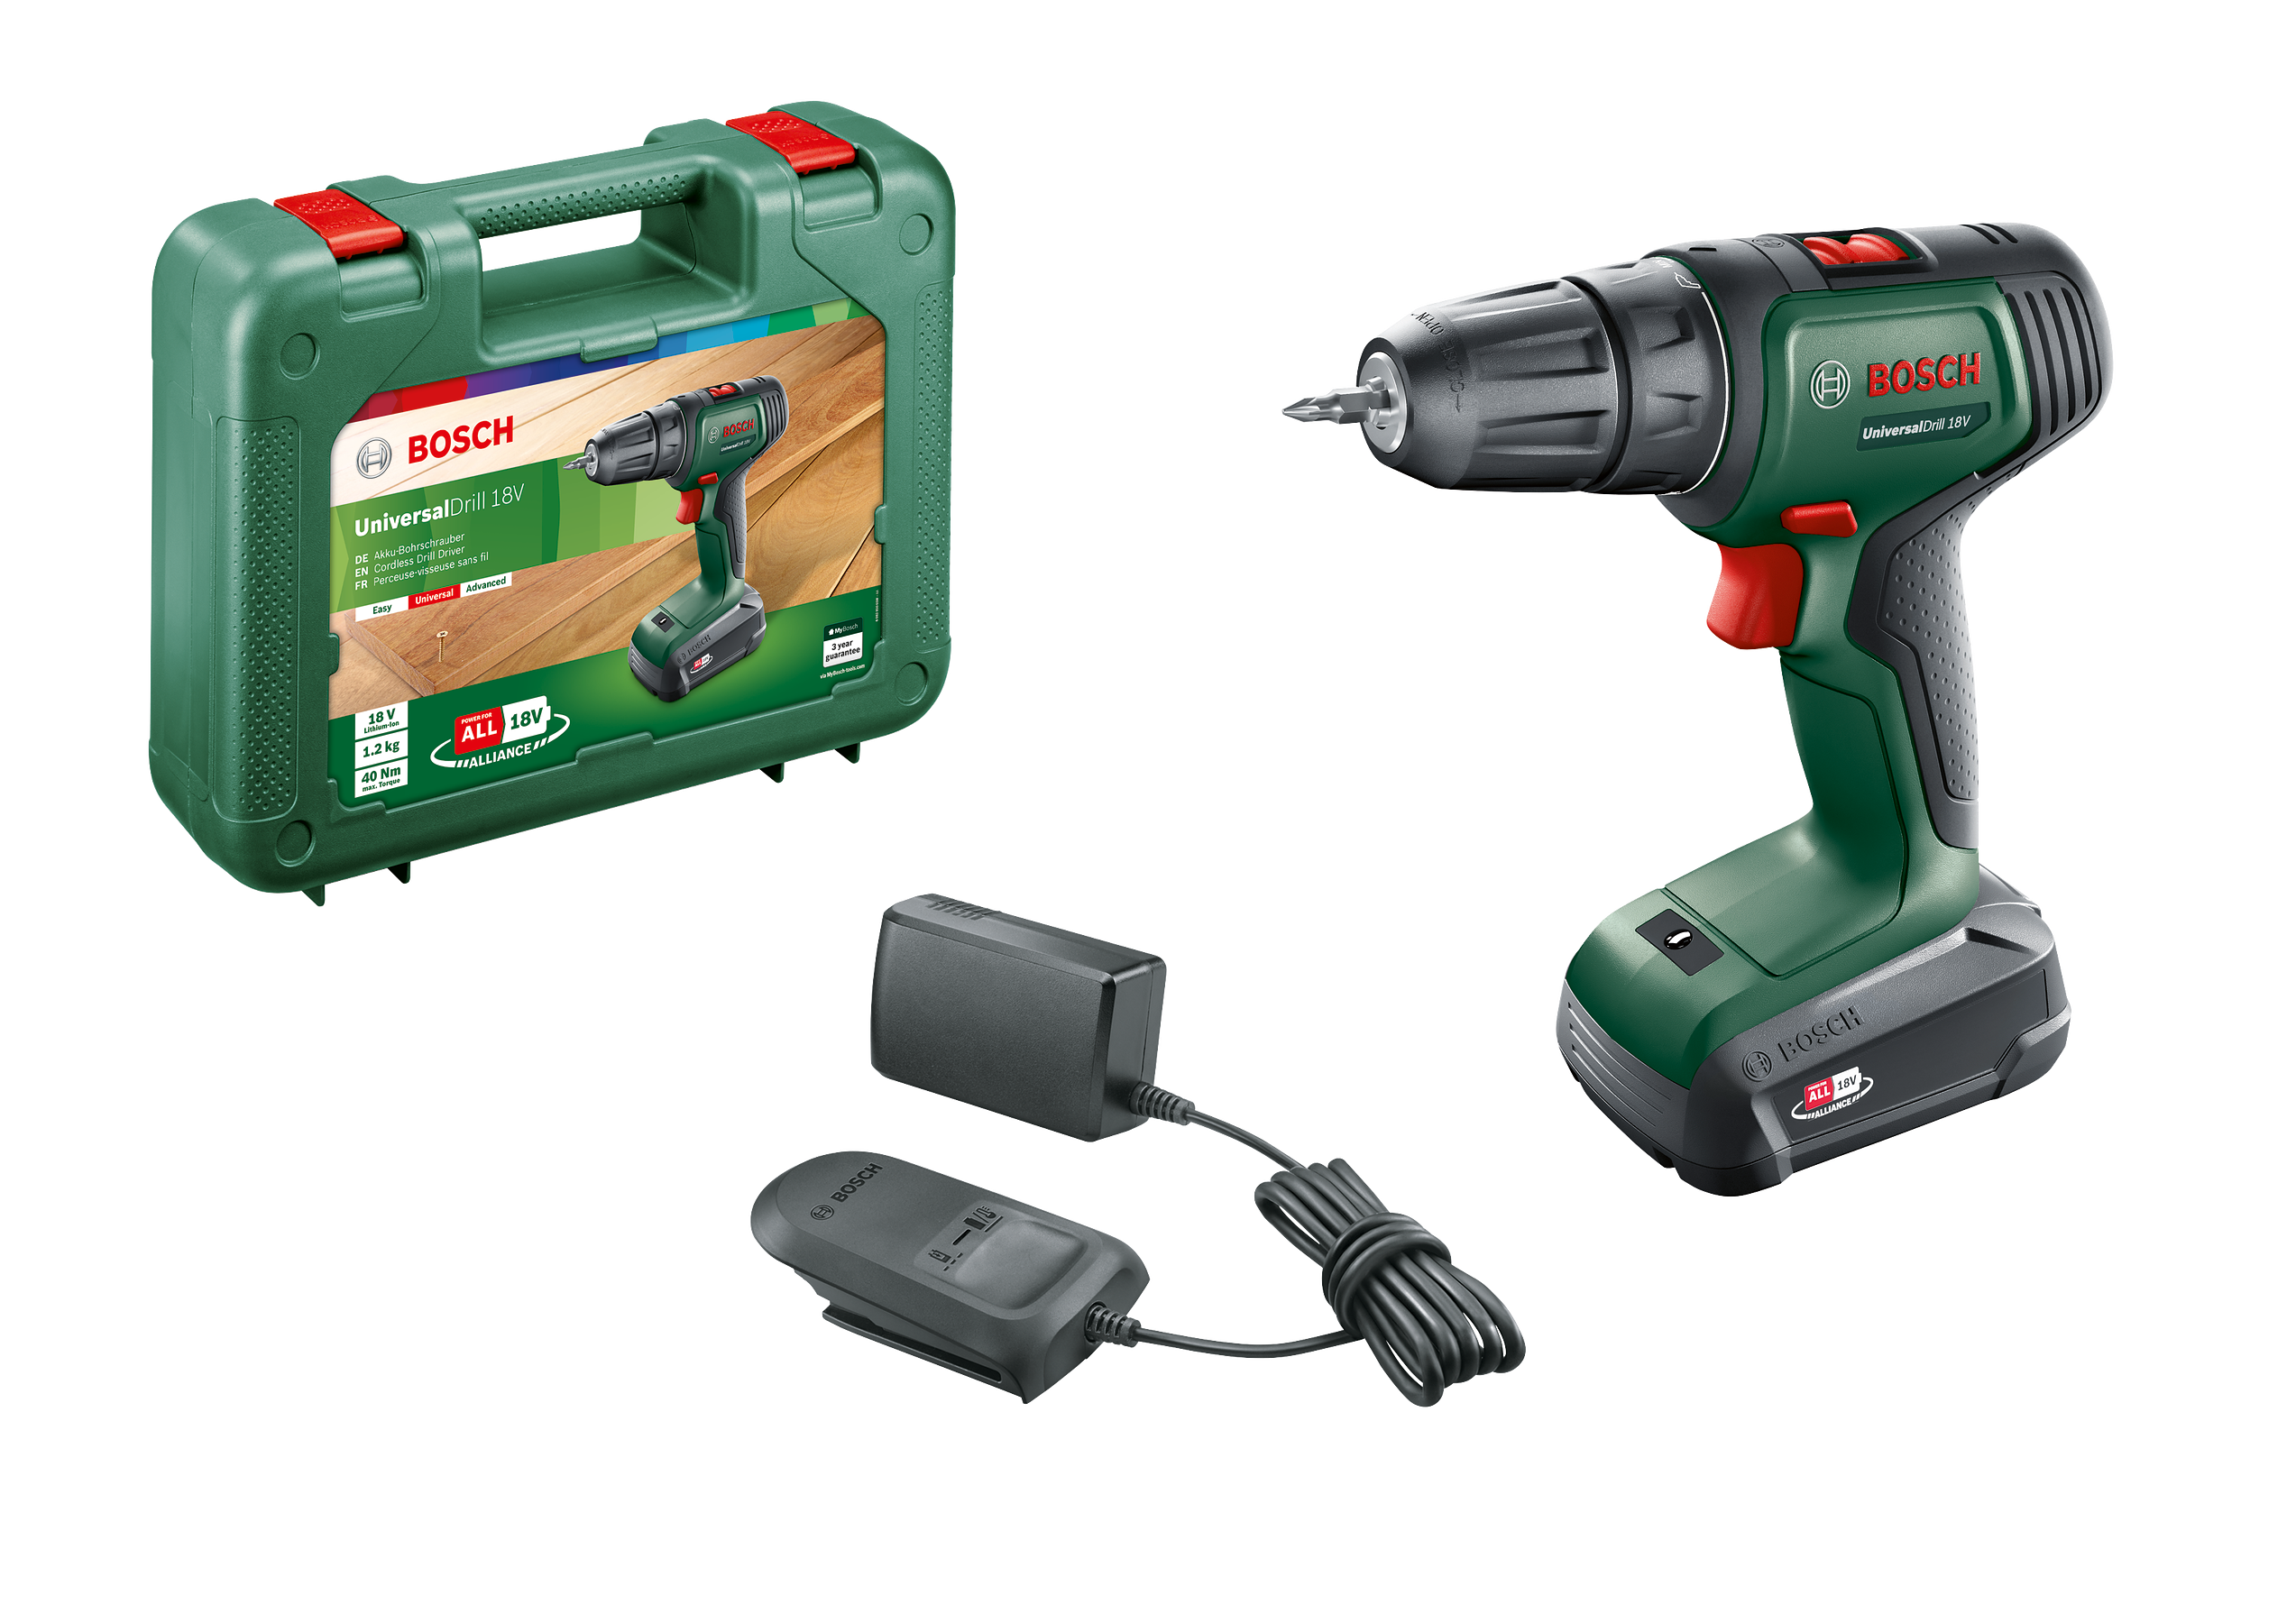 Bosch - UniversalDrill 18V ( Battery And Charger Indcluded )